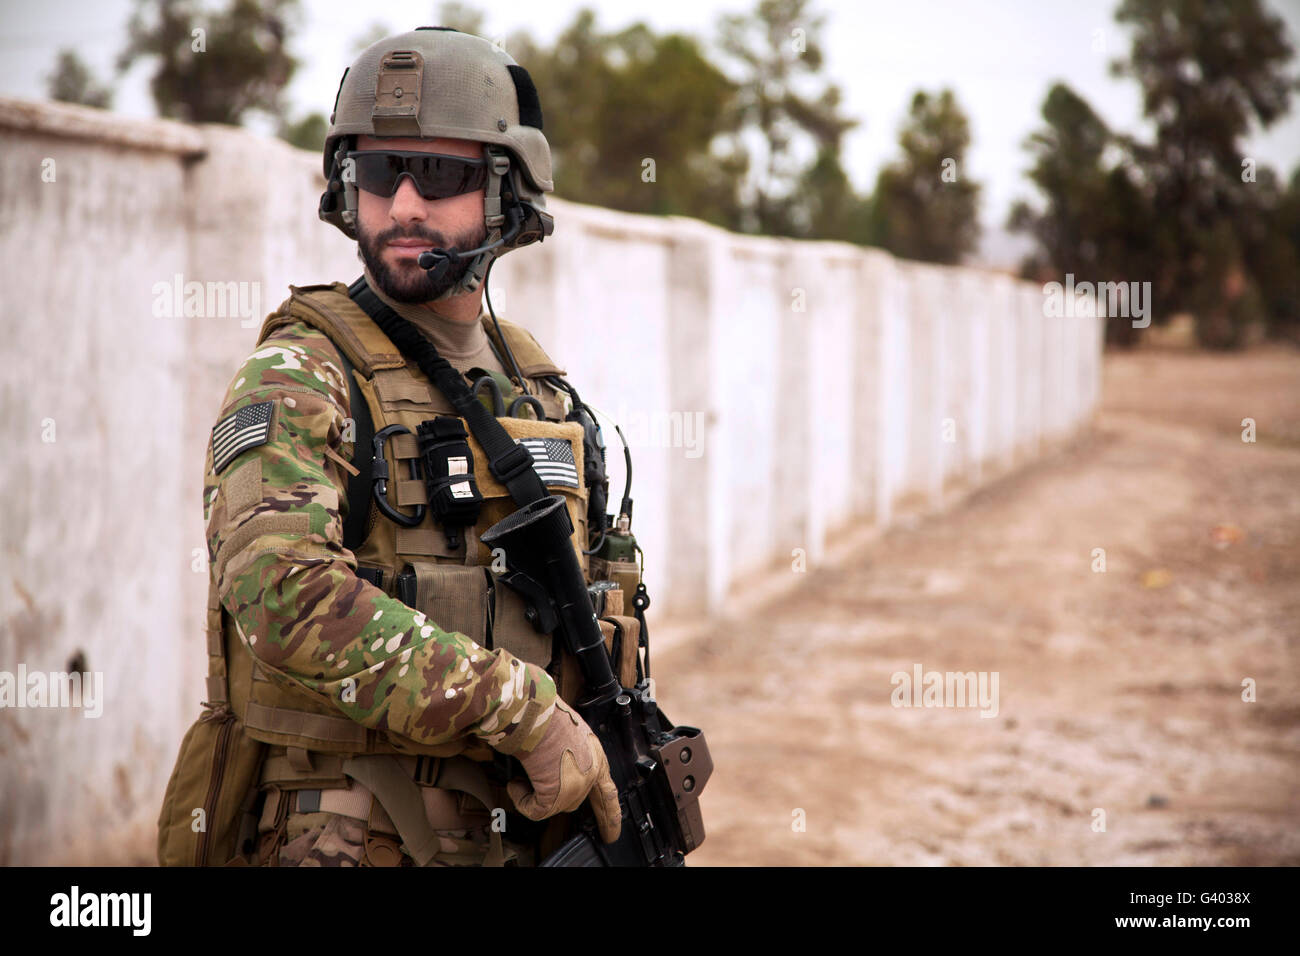 A coalition force member maintains security during a patrol. Stock Photo